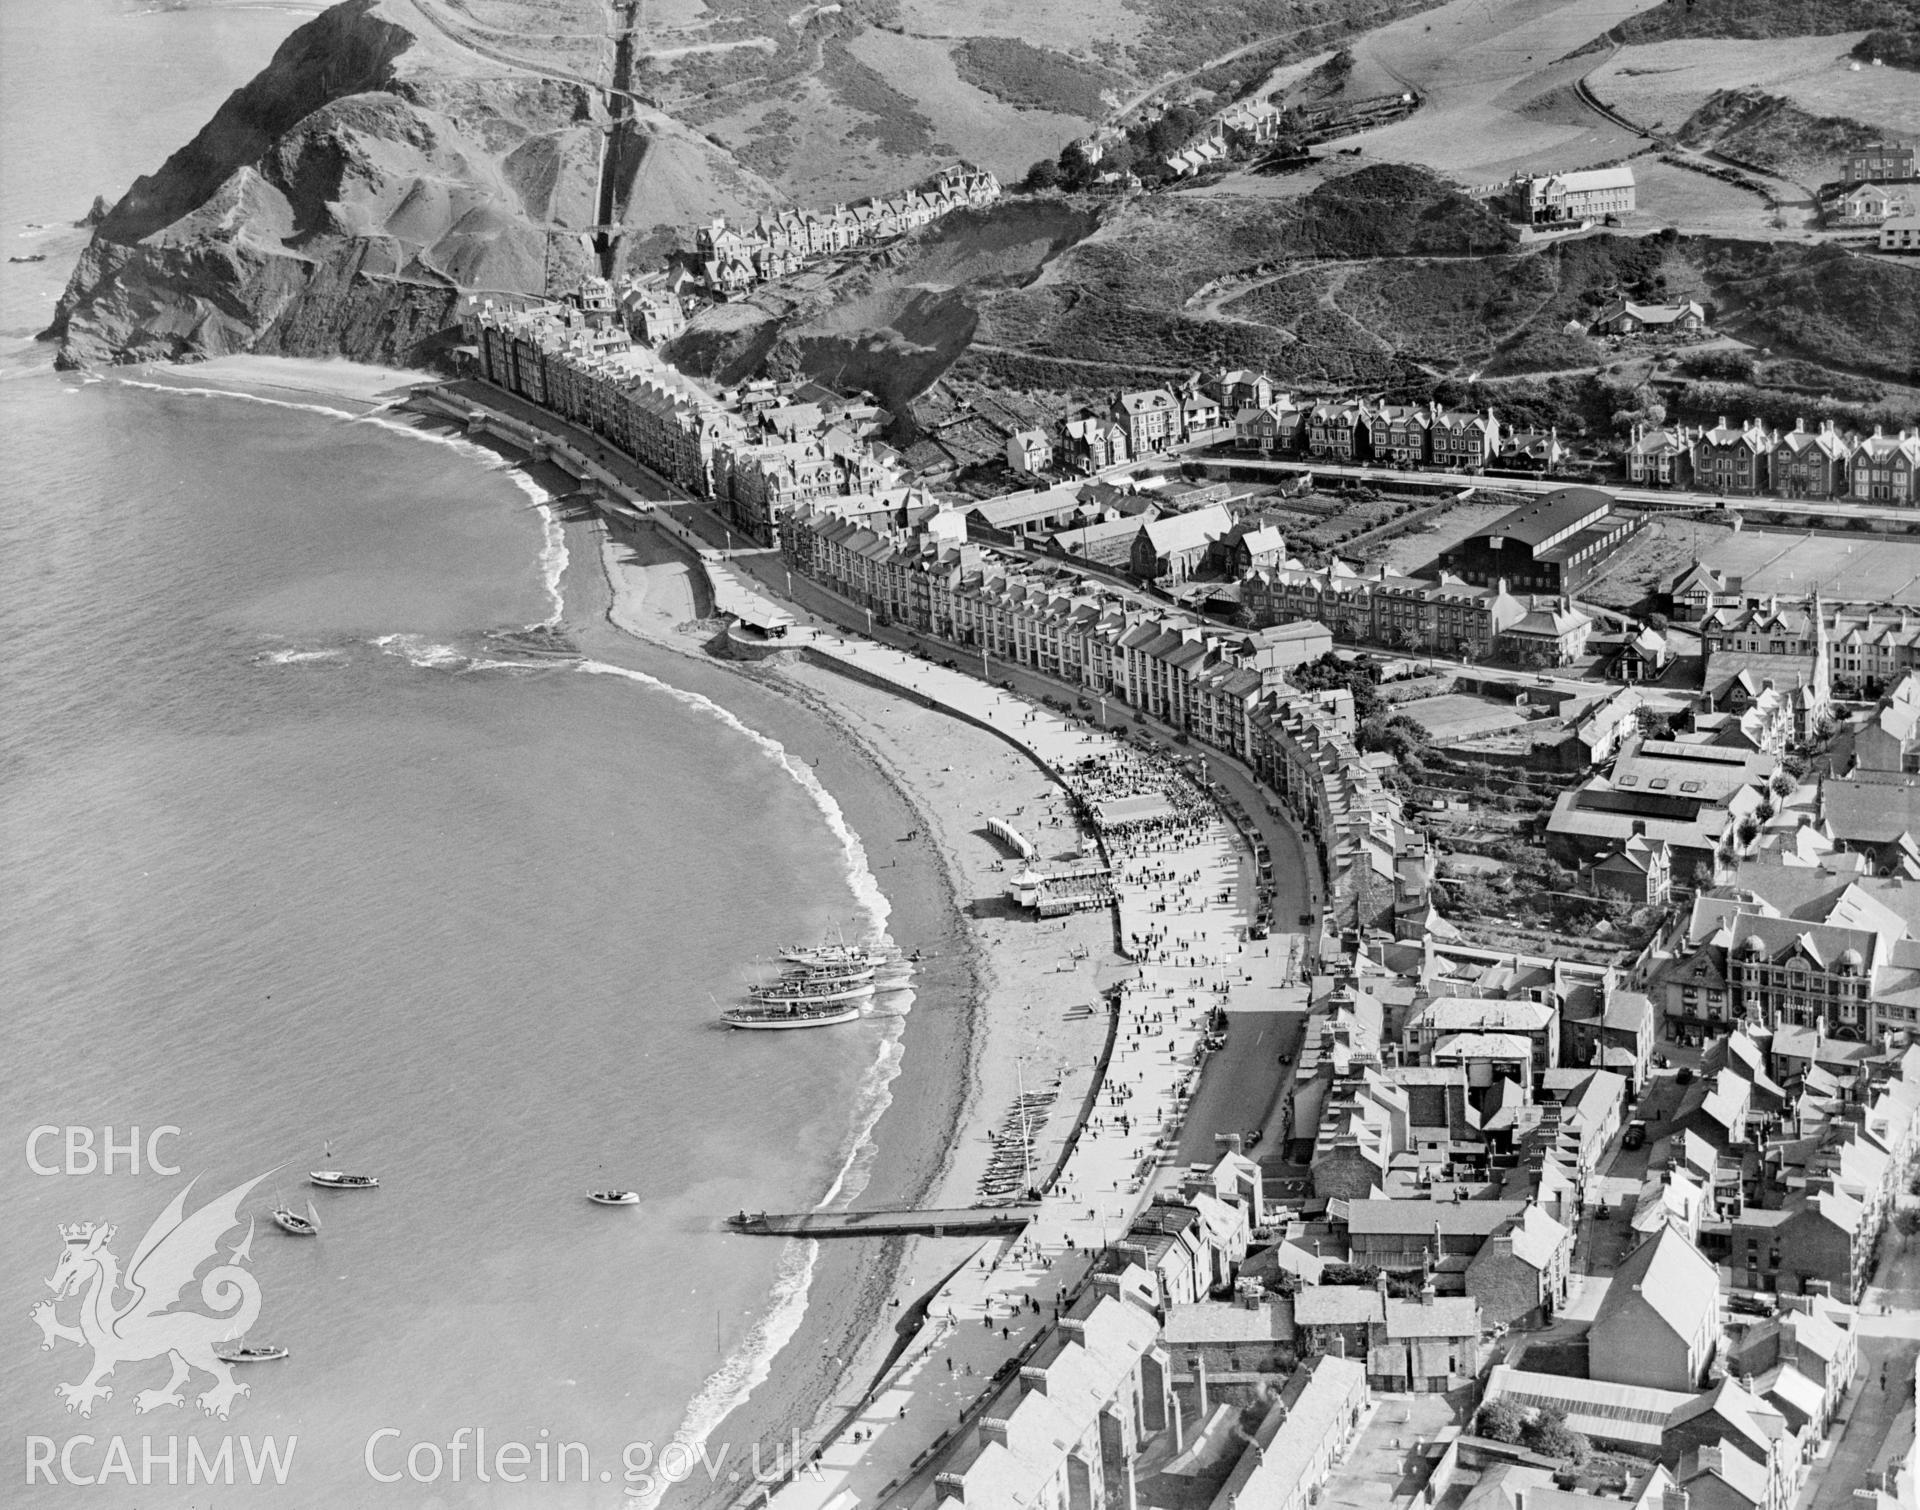 General view of Aberystwyth showing seafront and town in summer, oblique aerial view. 5?x4? black and white glass plate negative.